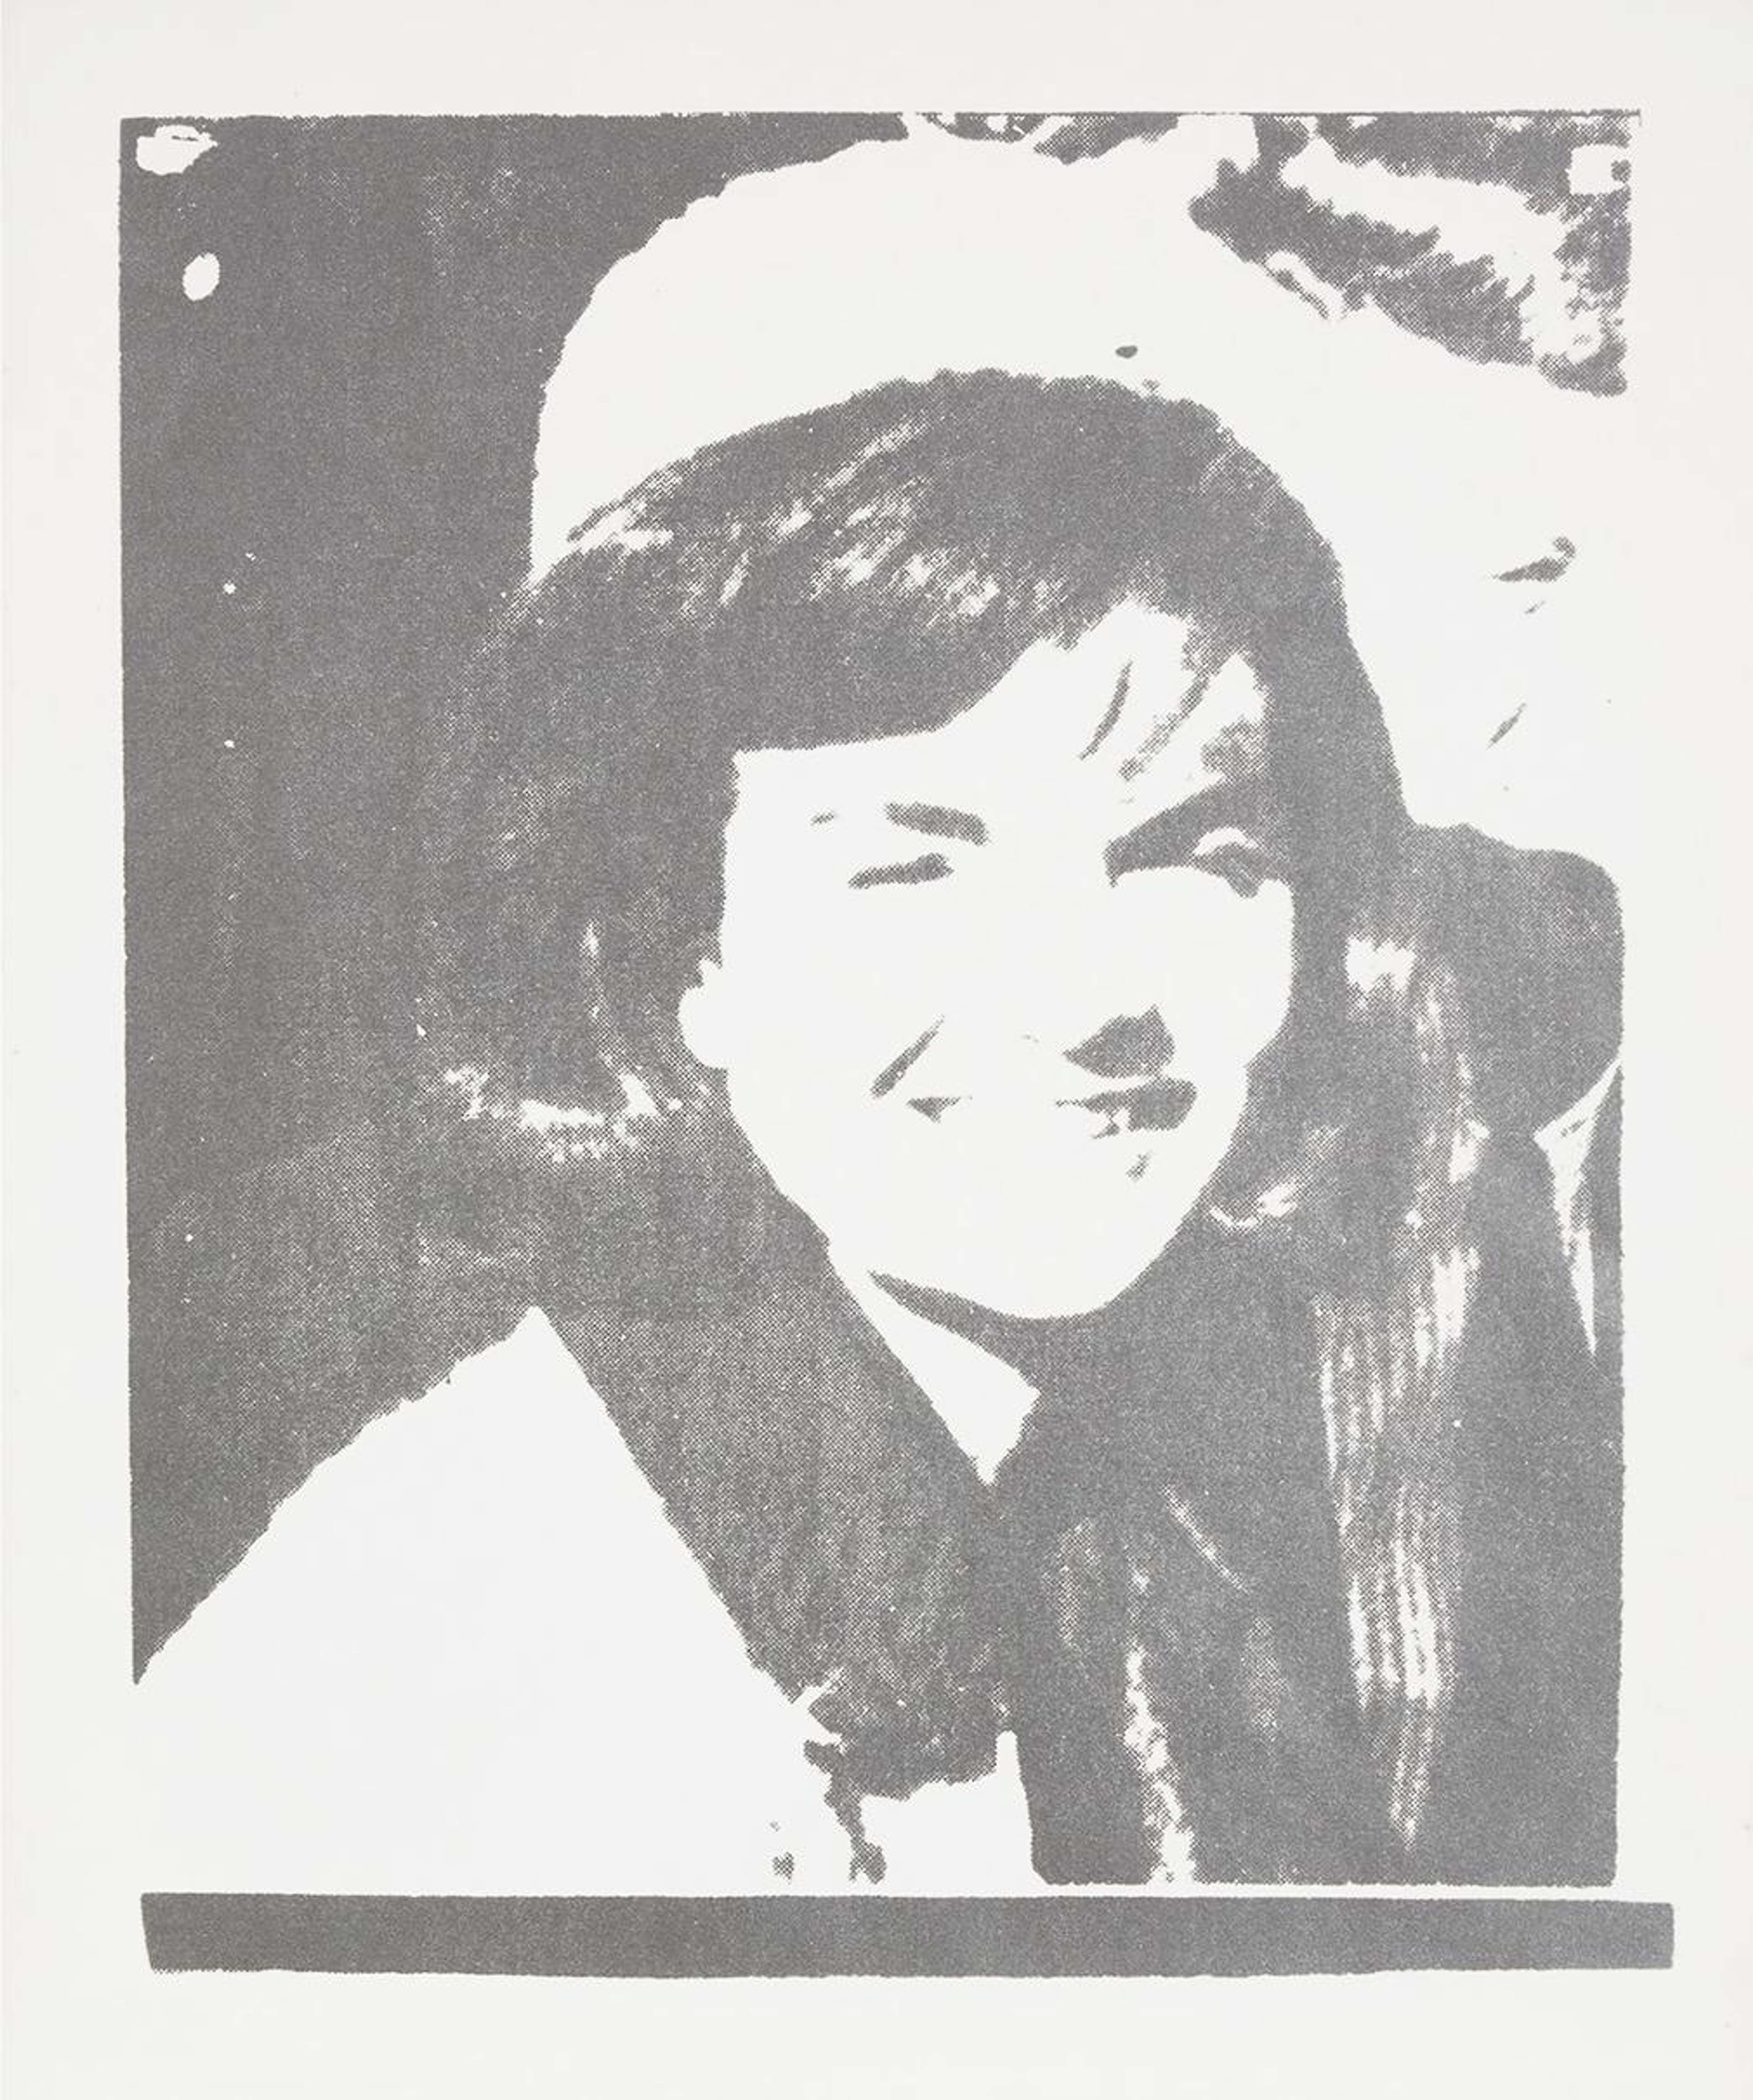 The print shows a press photograph of Jacqueline Kennedy just moments before the assassination of her husband, President John F. Kennedy. Left largely untouched by the artist, the image is in black and white with high contrast and has a grainy quality, like that of the original newspaper image.